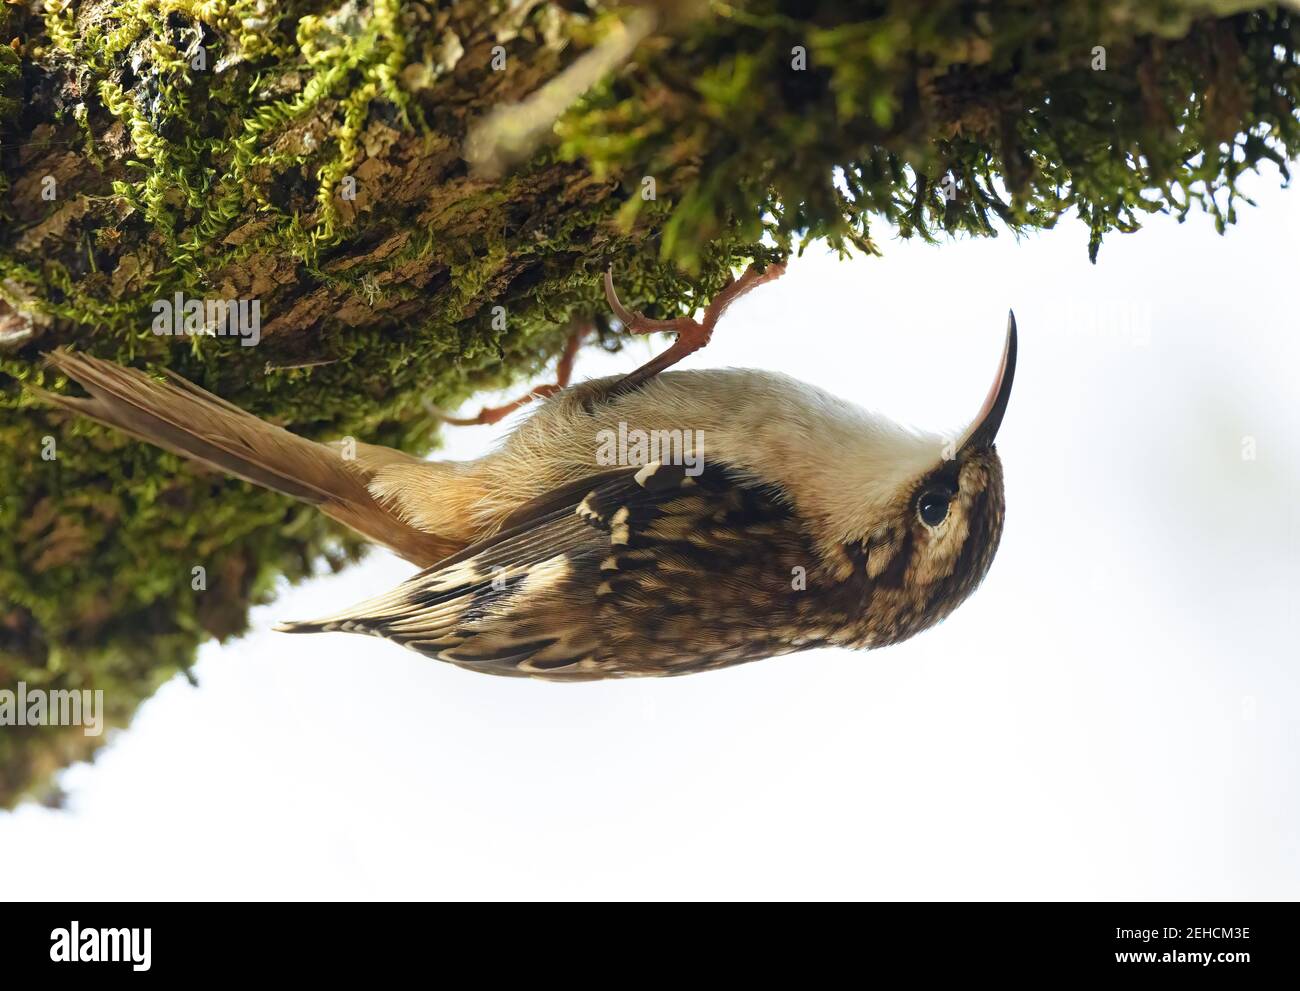 Brown Creeper (Certhia americana) hanging upside down from a mossy tree branch Stock Photo